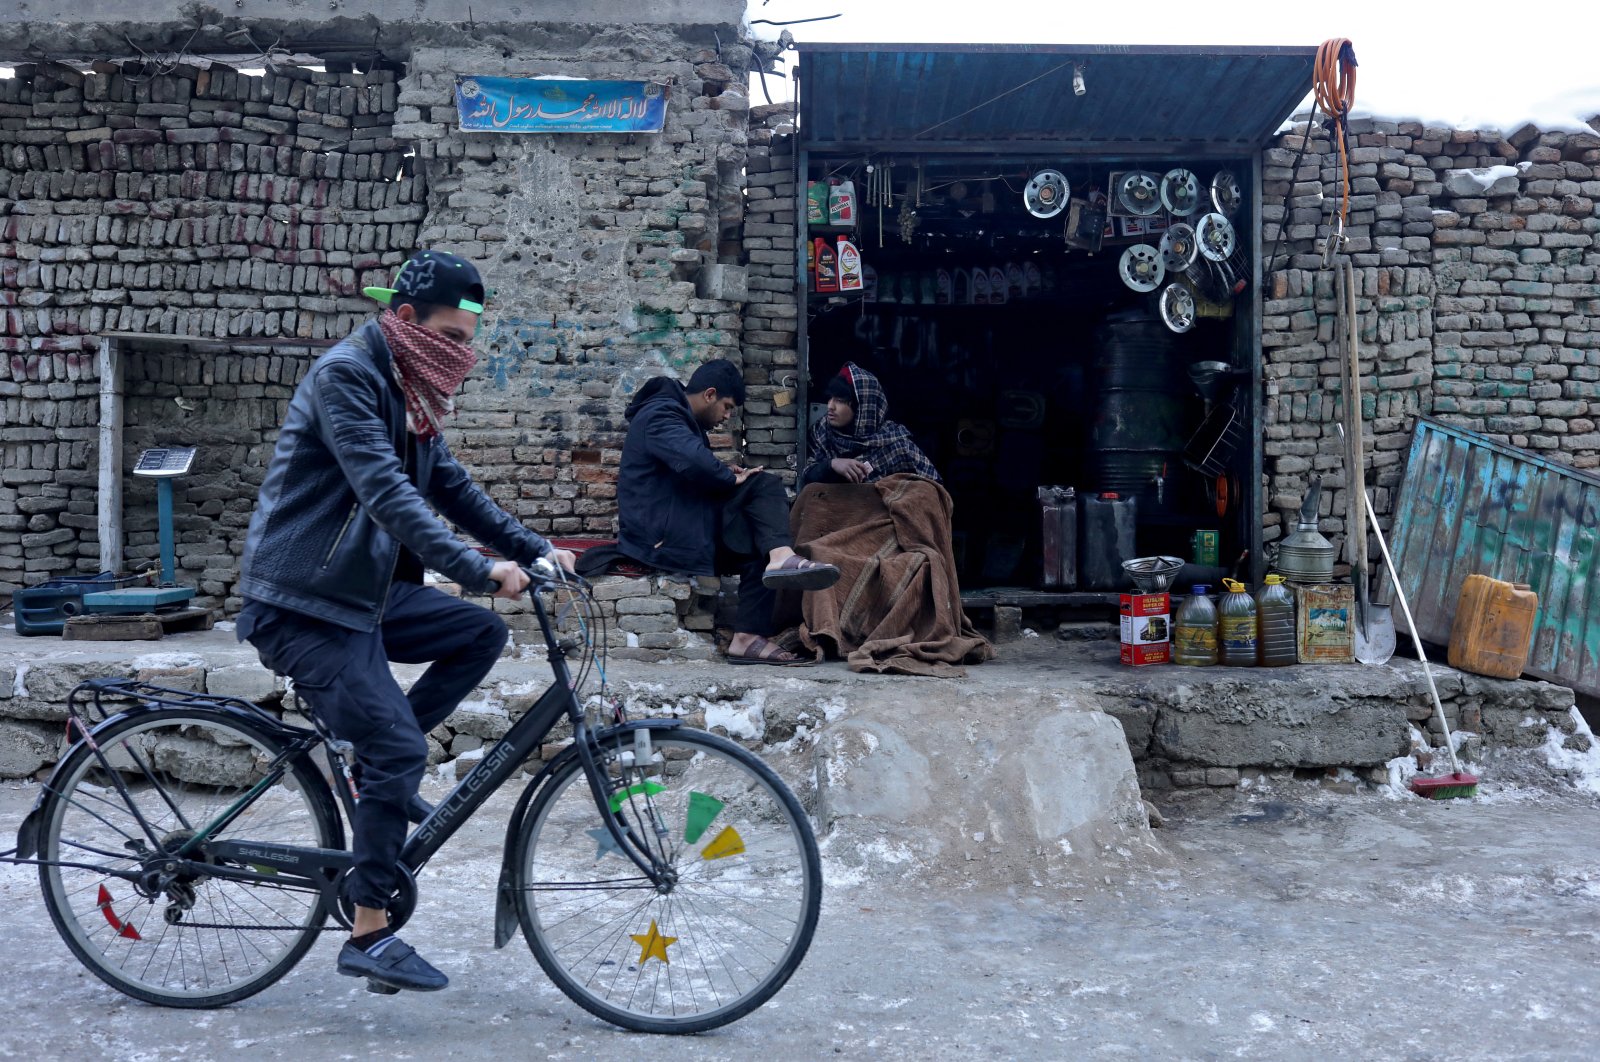 An Afghan man rides his bicycle past a shop selling fuel in Kabul, Afghanistan, Jan. 27, 2022. (Reuters Photo)